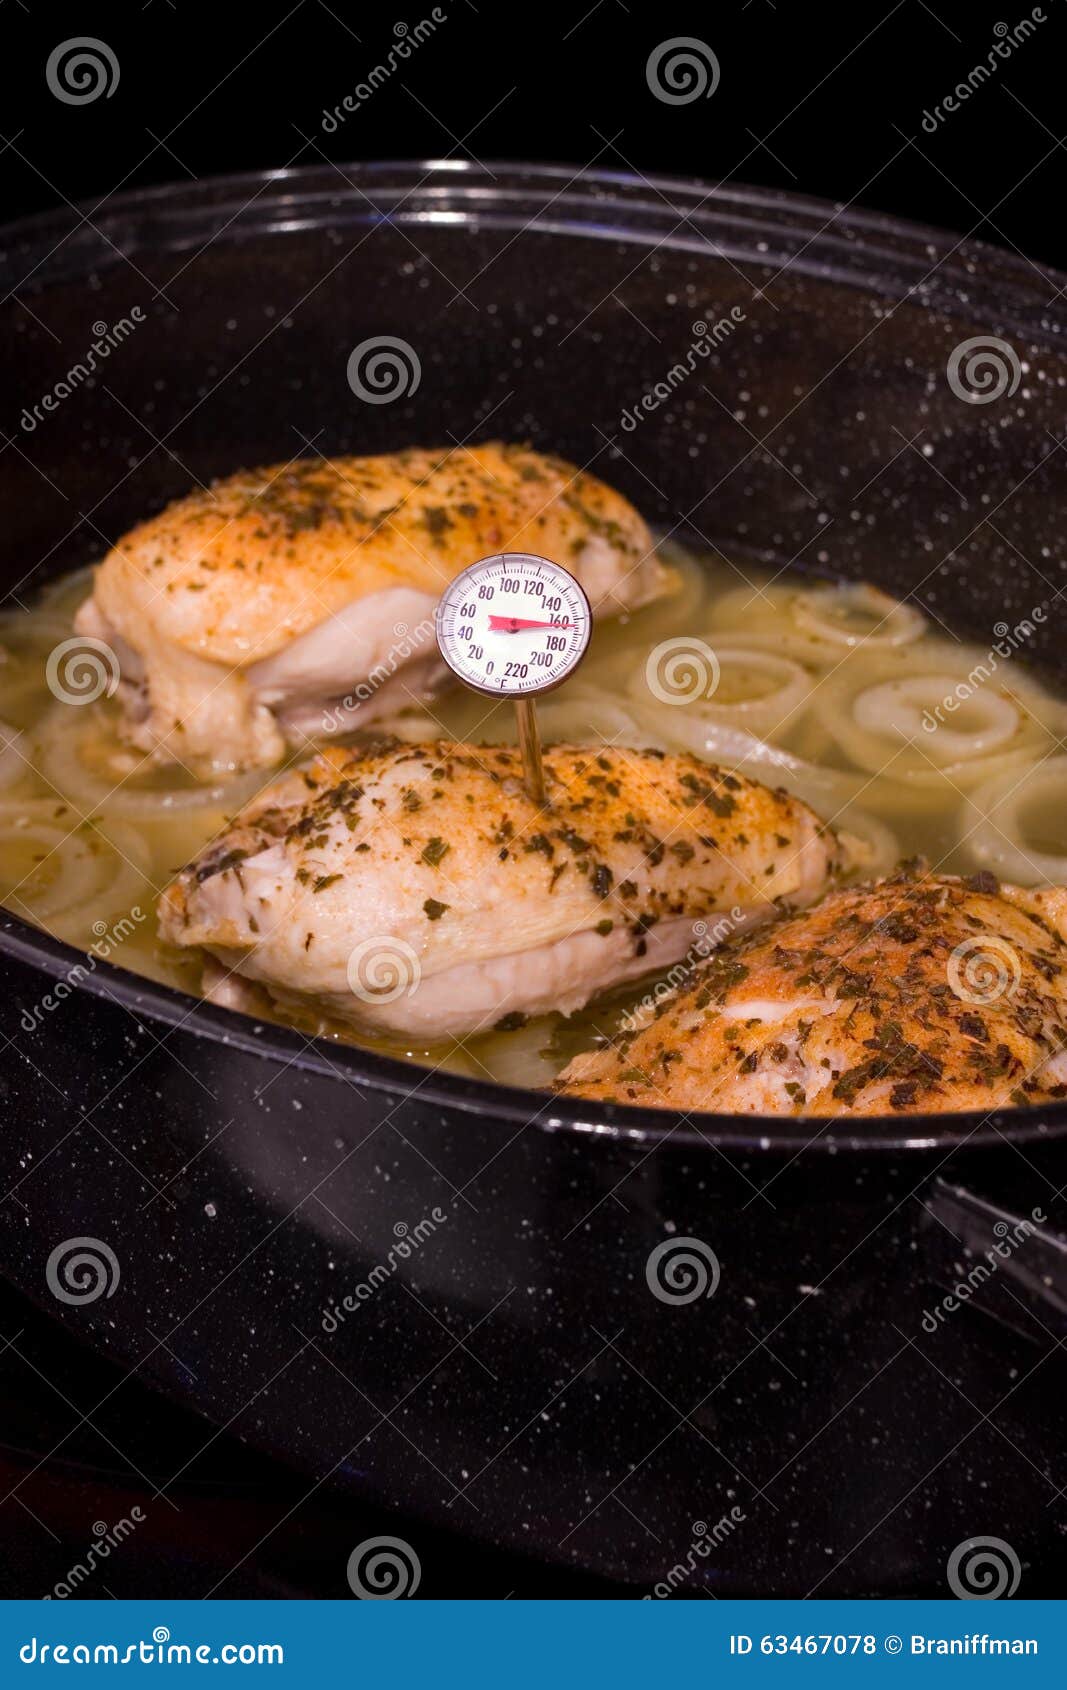 https://thumbs.dreamstime.com/z/perfectly-cooked-chicken-thermometer-63467078.jpg